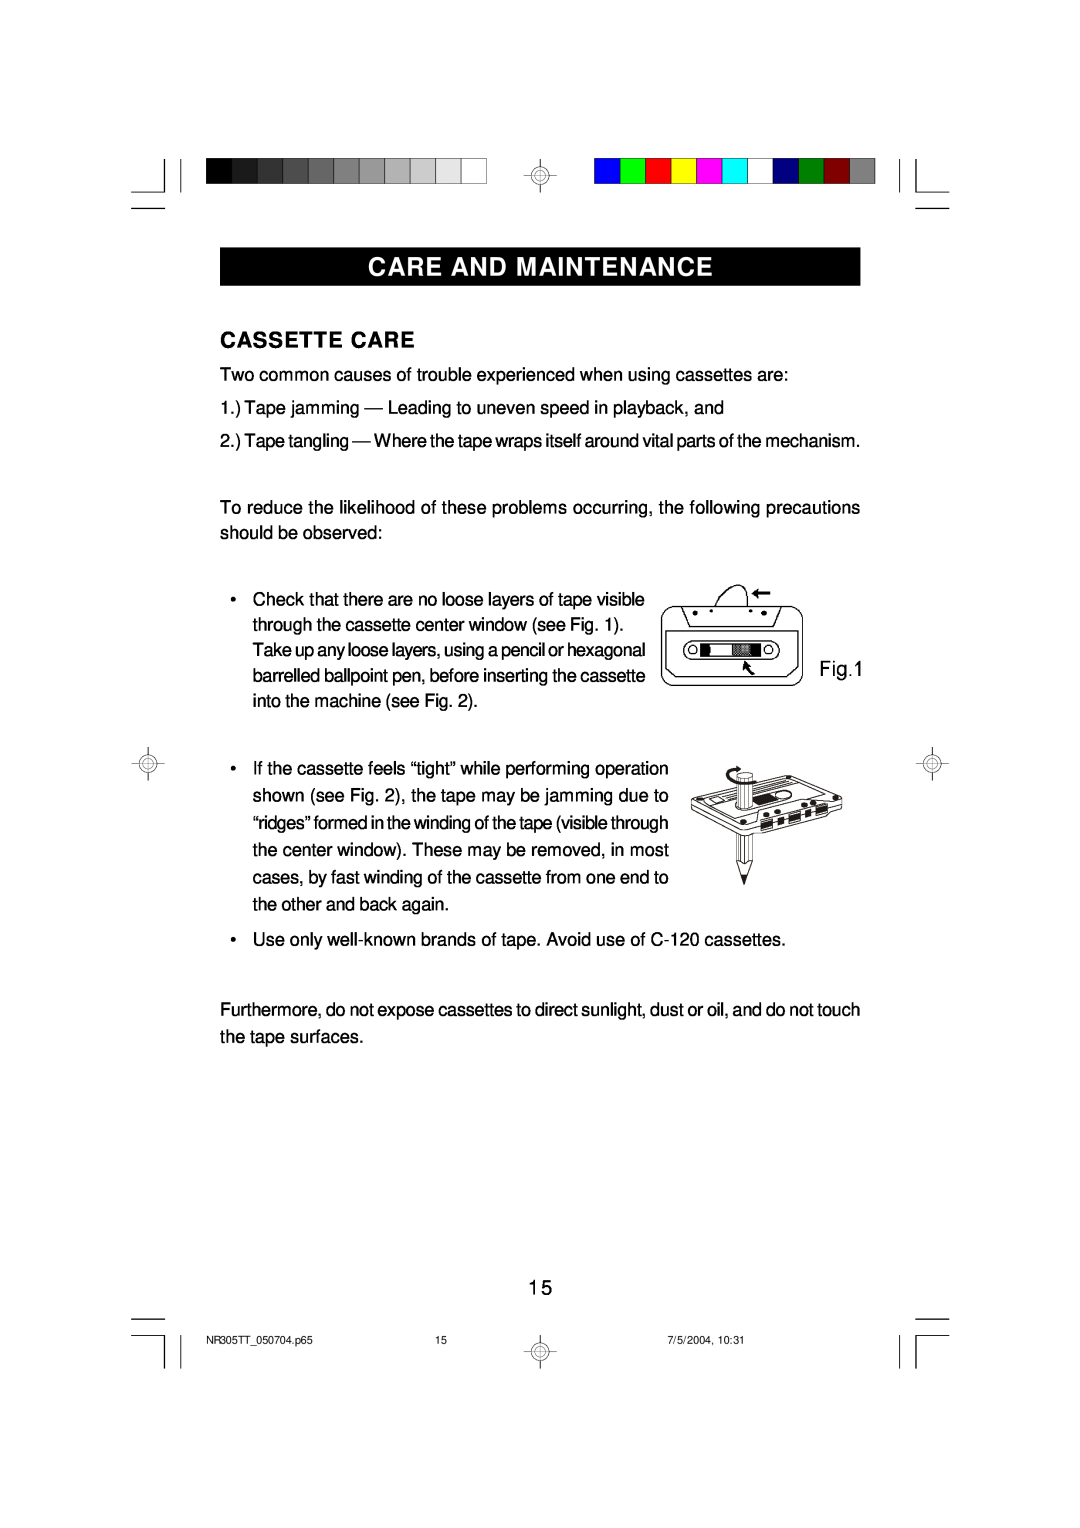 Emerson NR305TT owner manual Care And Maintenance, Cassette Care 